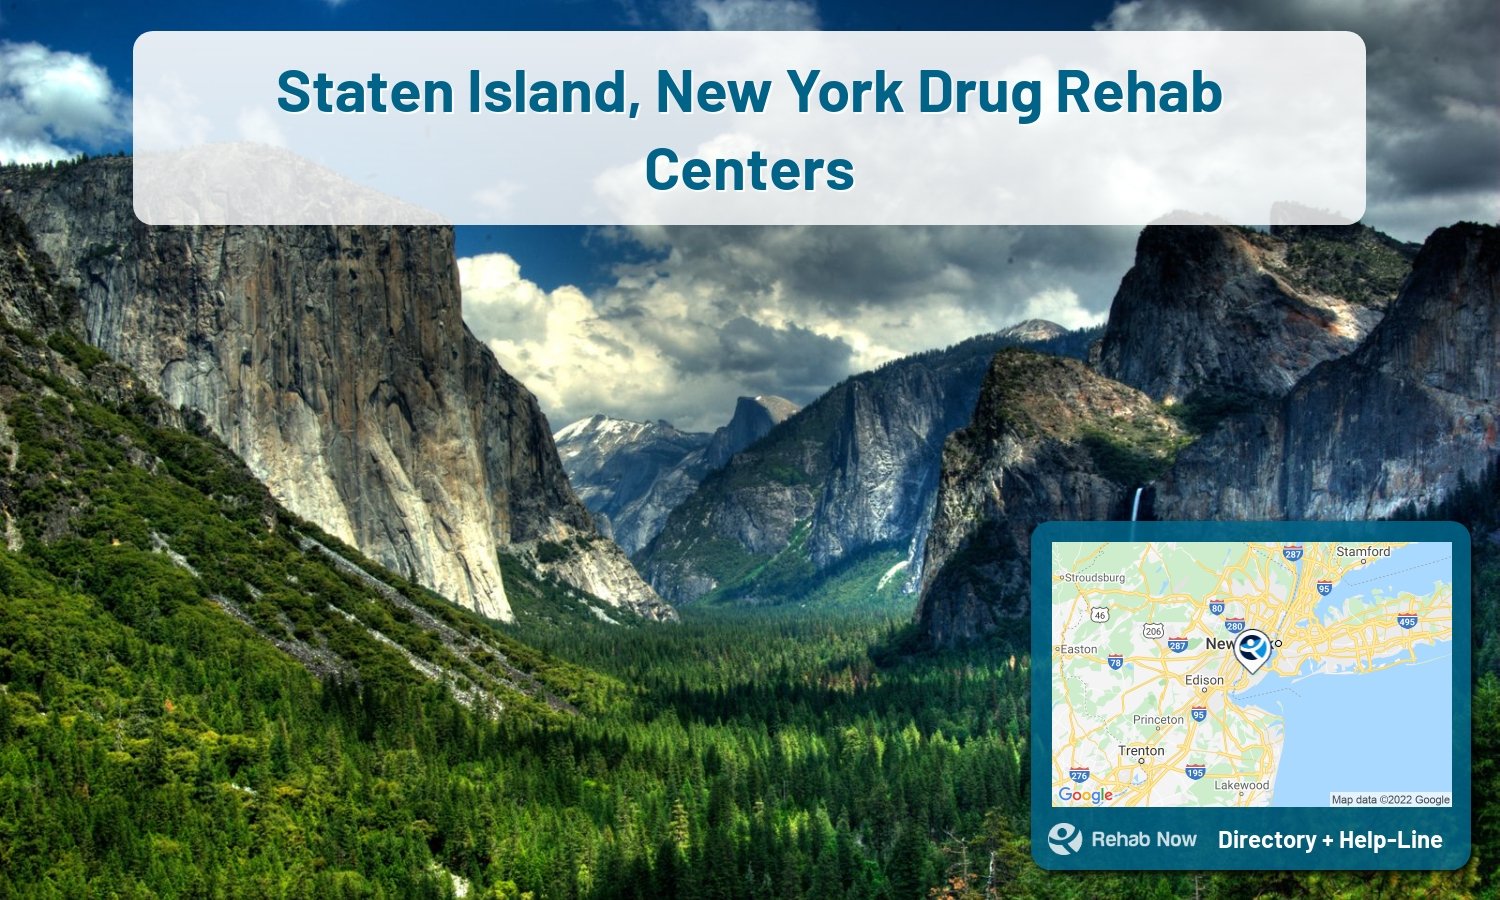 View options, availability, treatment methods, and more, for drug rehab and alcohol treatment in Staten Island, New York